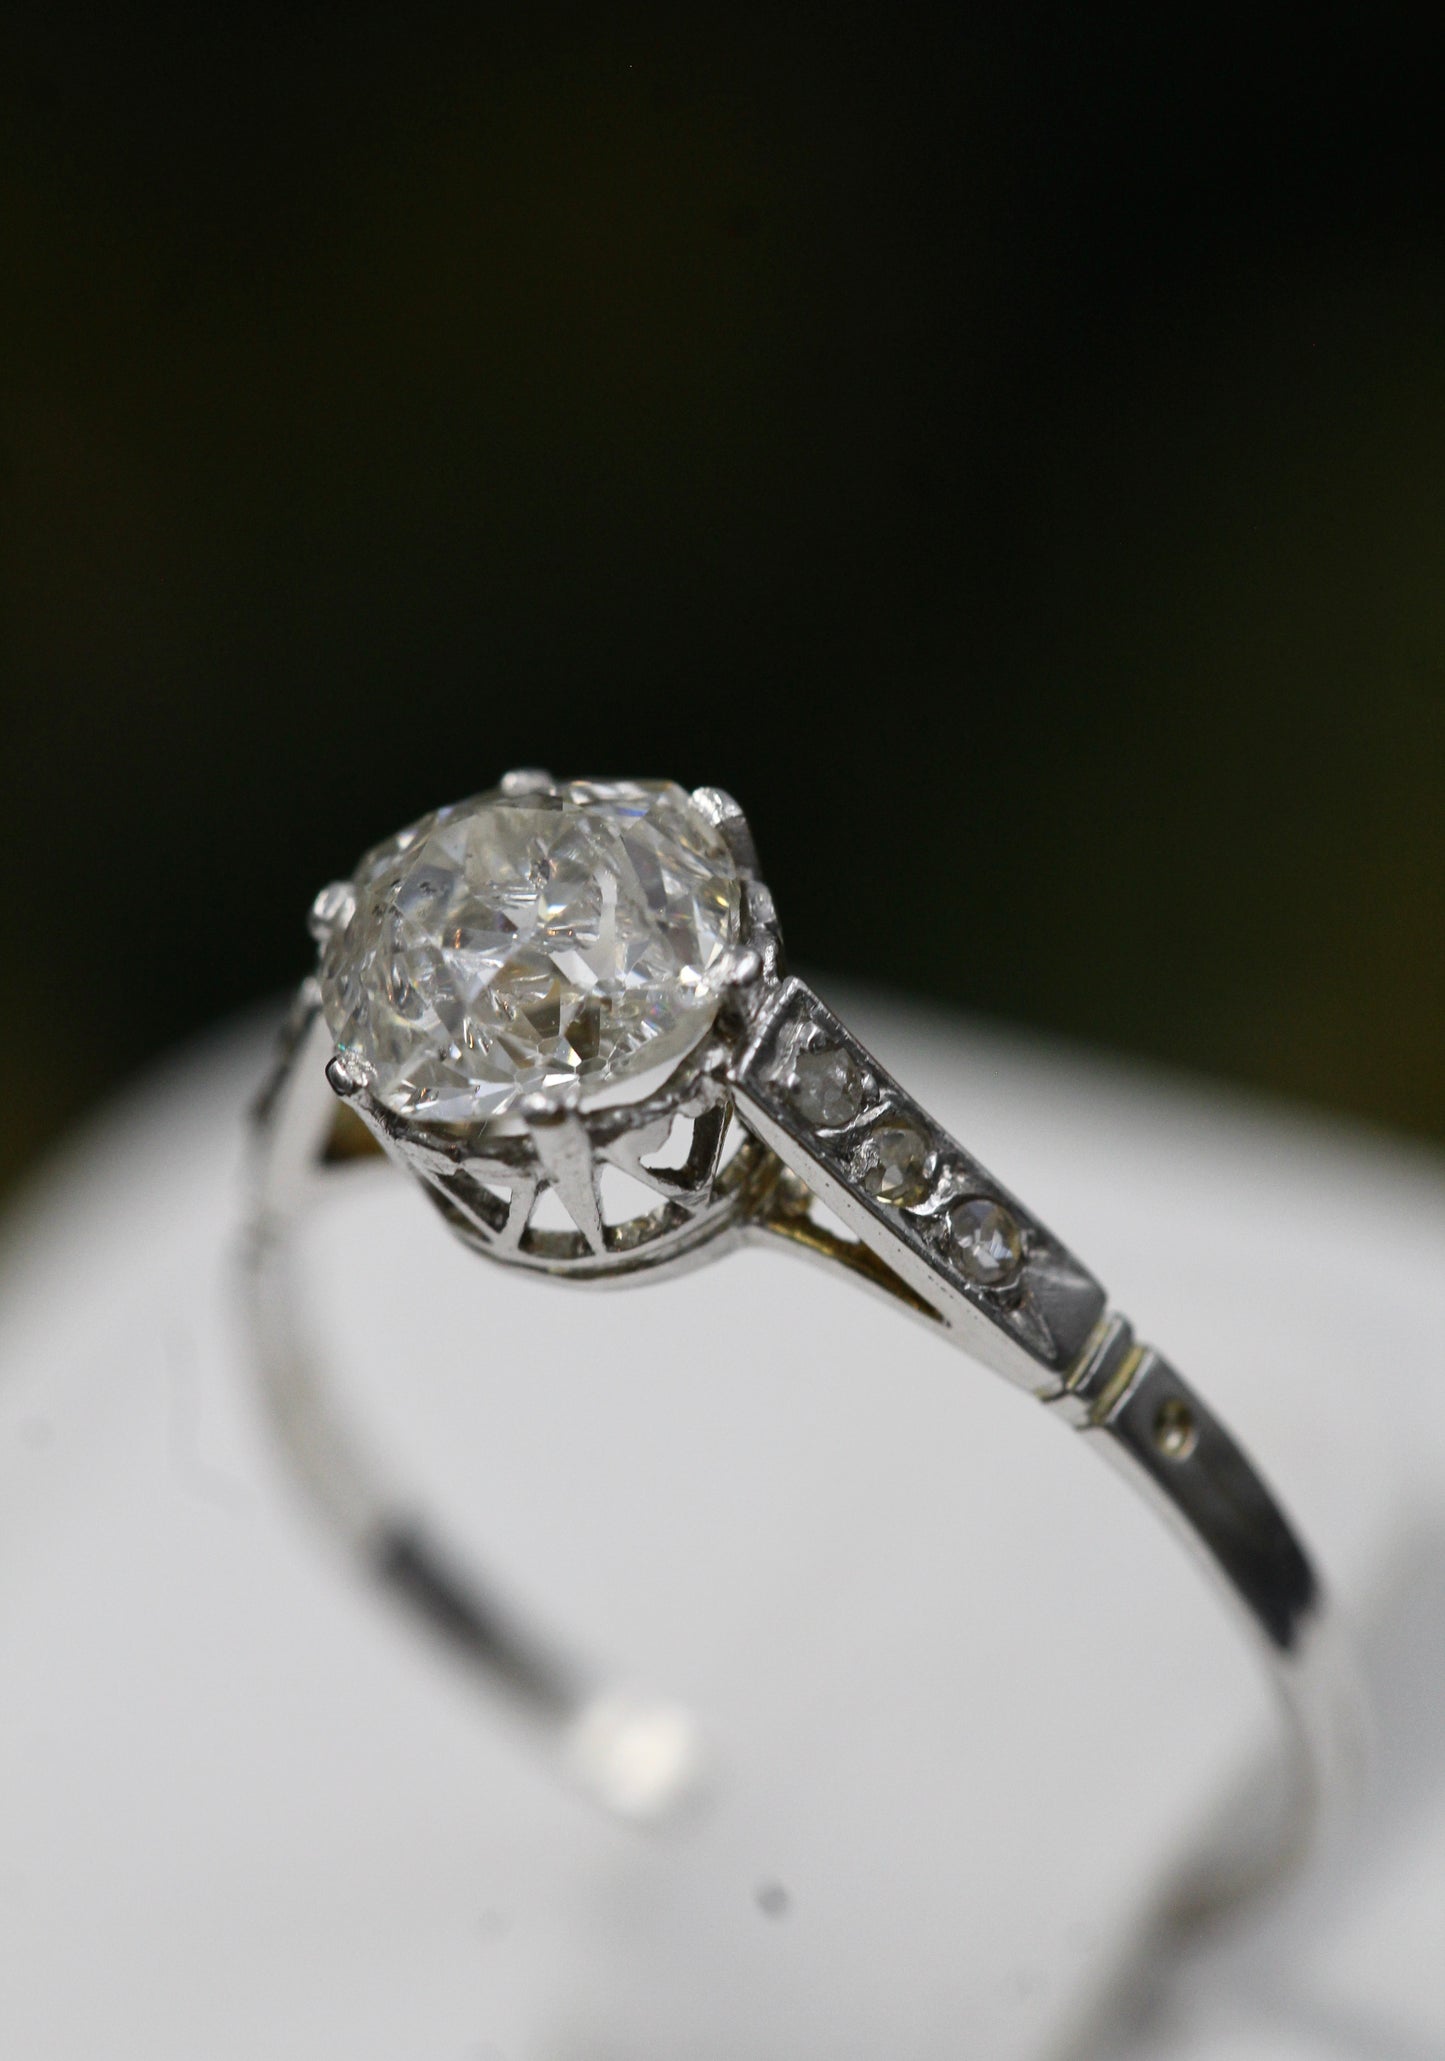 A very fine Platinum & 18 Carat Gold (tested), Old Cut Diamond Solitaire Ring, with Diamond Set Shoulders. Circa 1930. - Robin Haydock Antiques